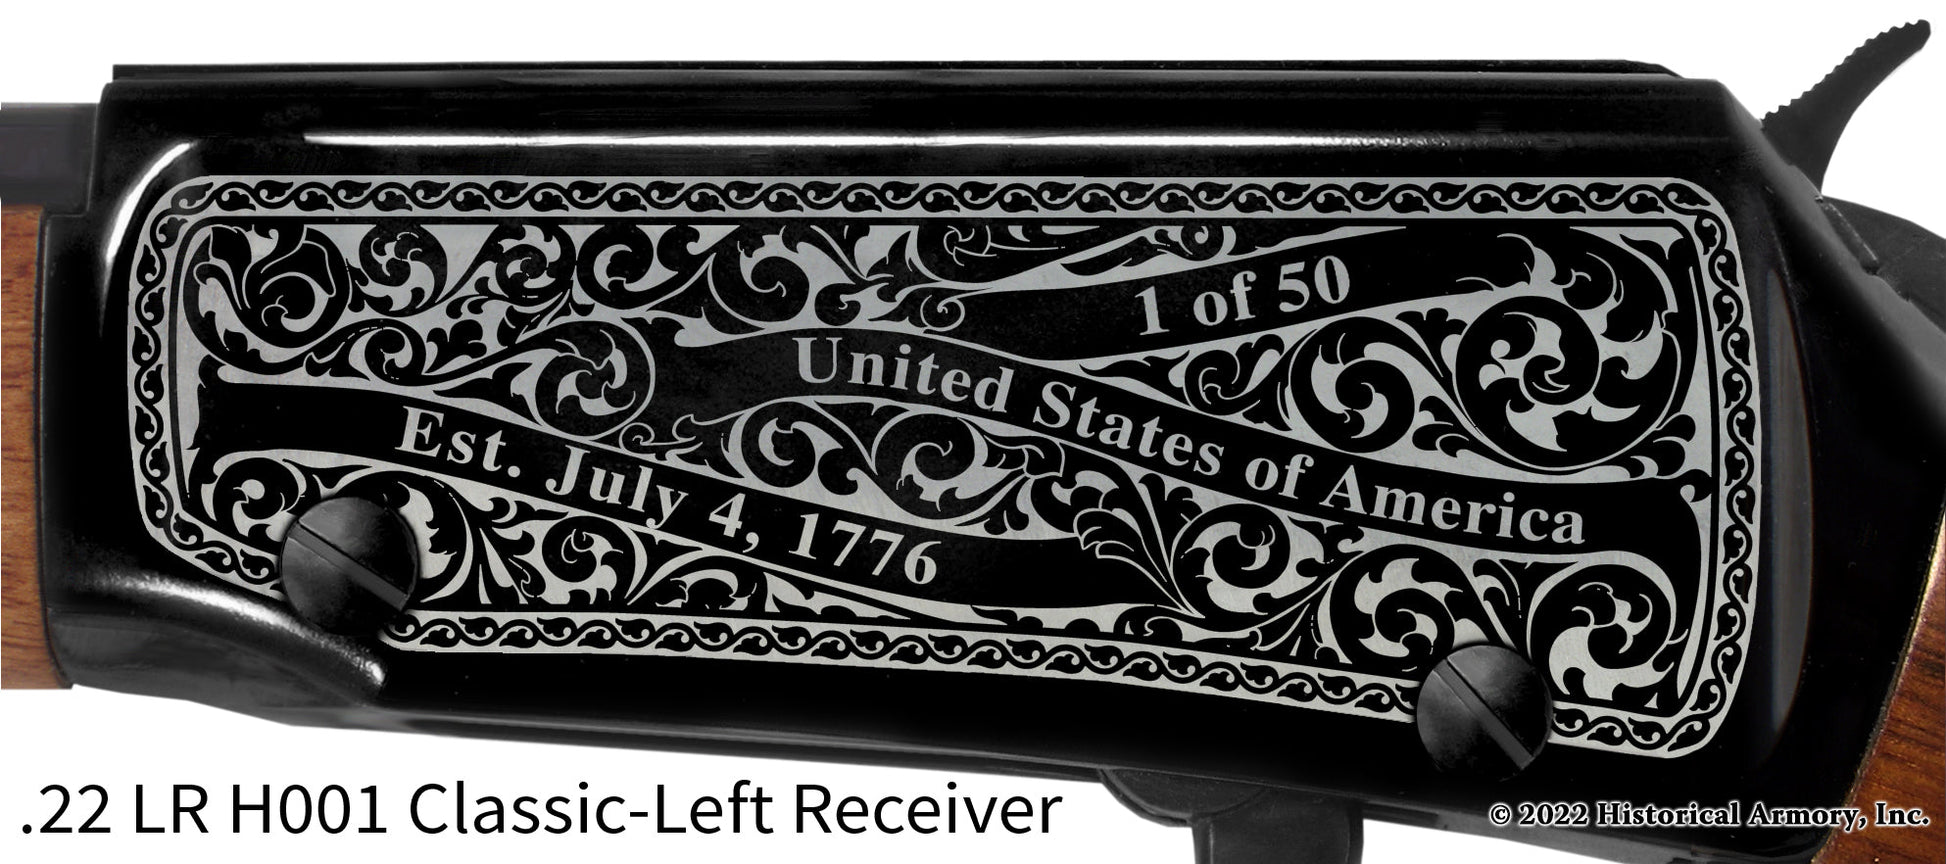 Labette County Kansas Engraved Henry H001 Rifle